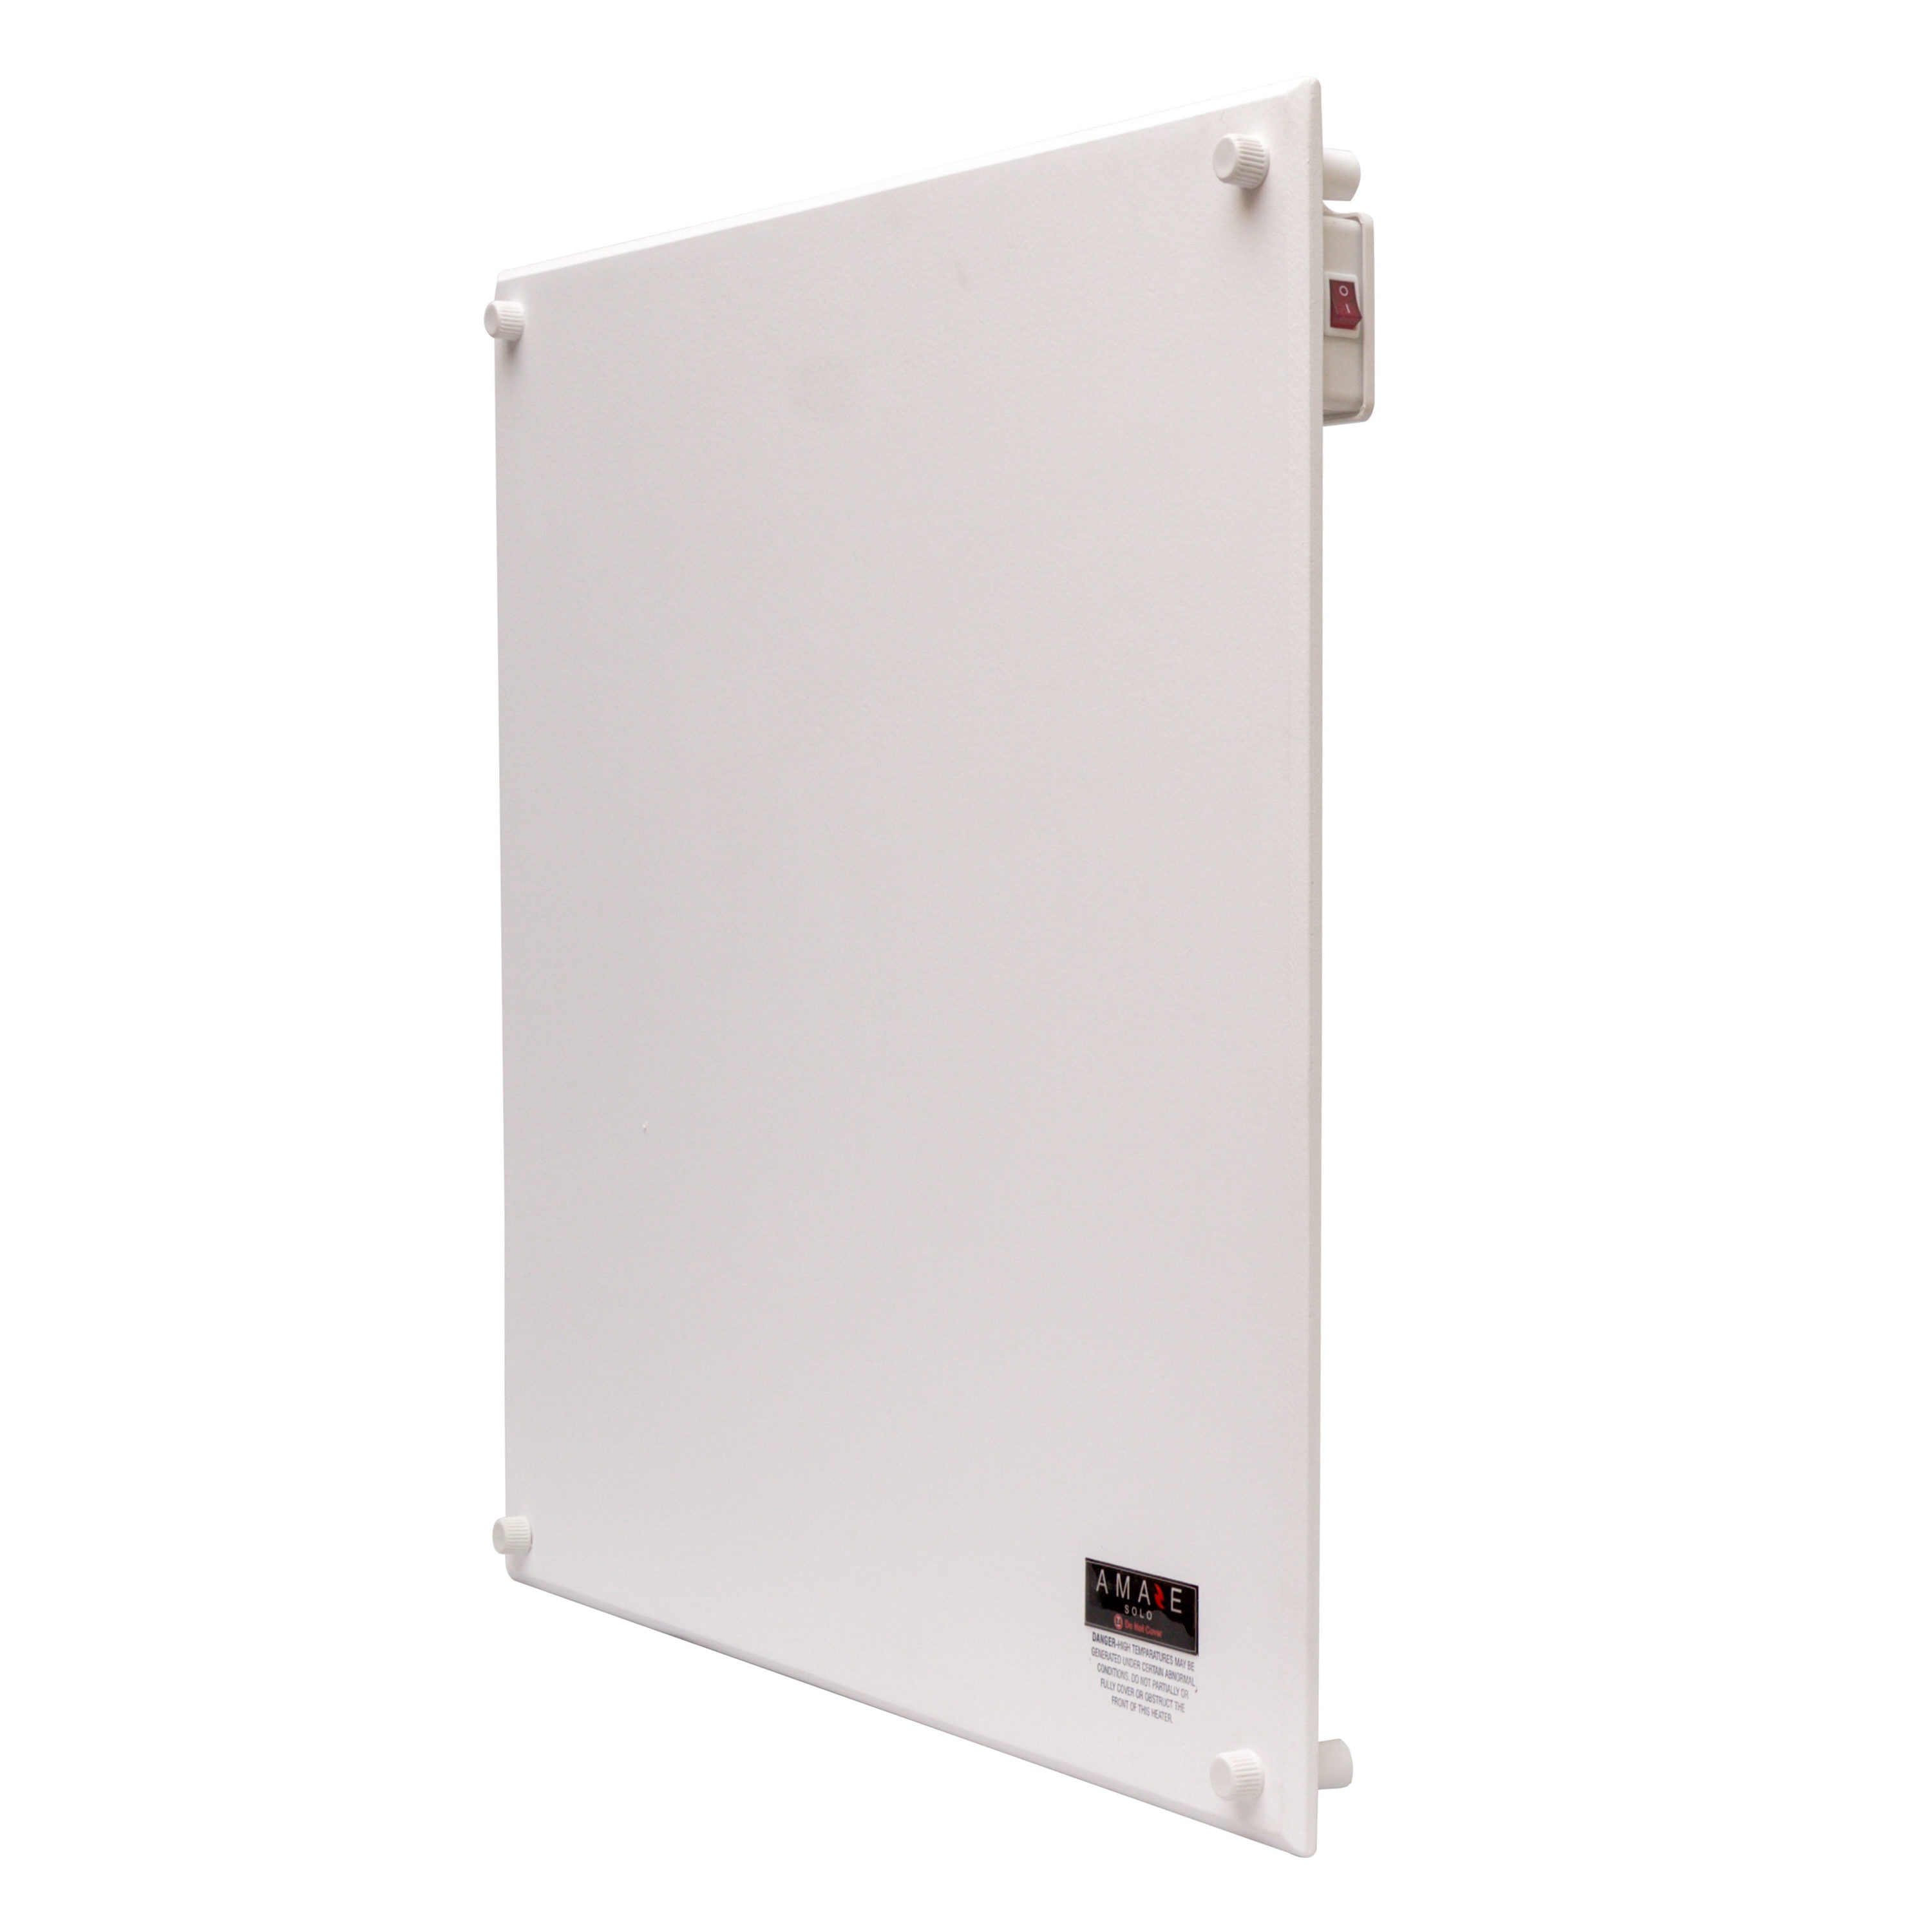 Infrared Wall mounted Picture Heater. Far Infrared Heating Panel 420W